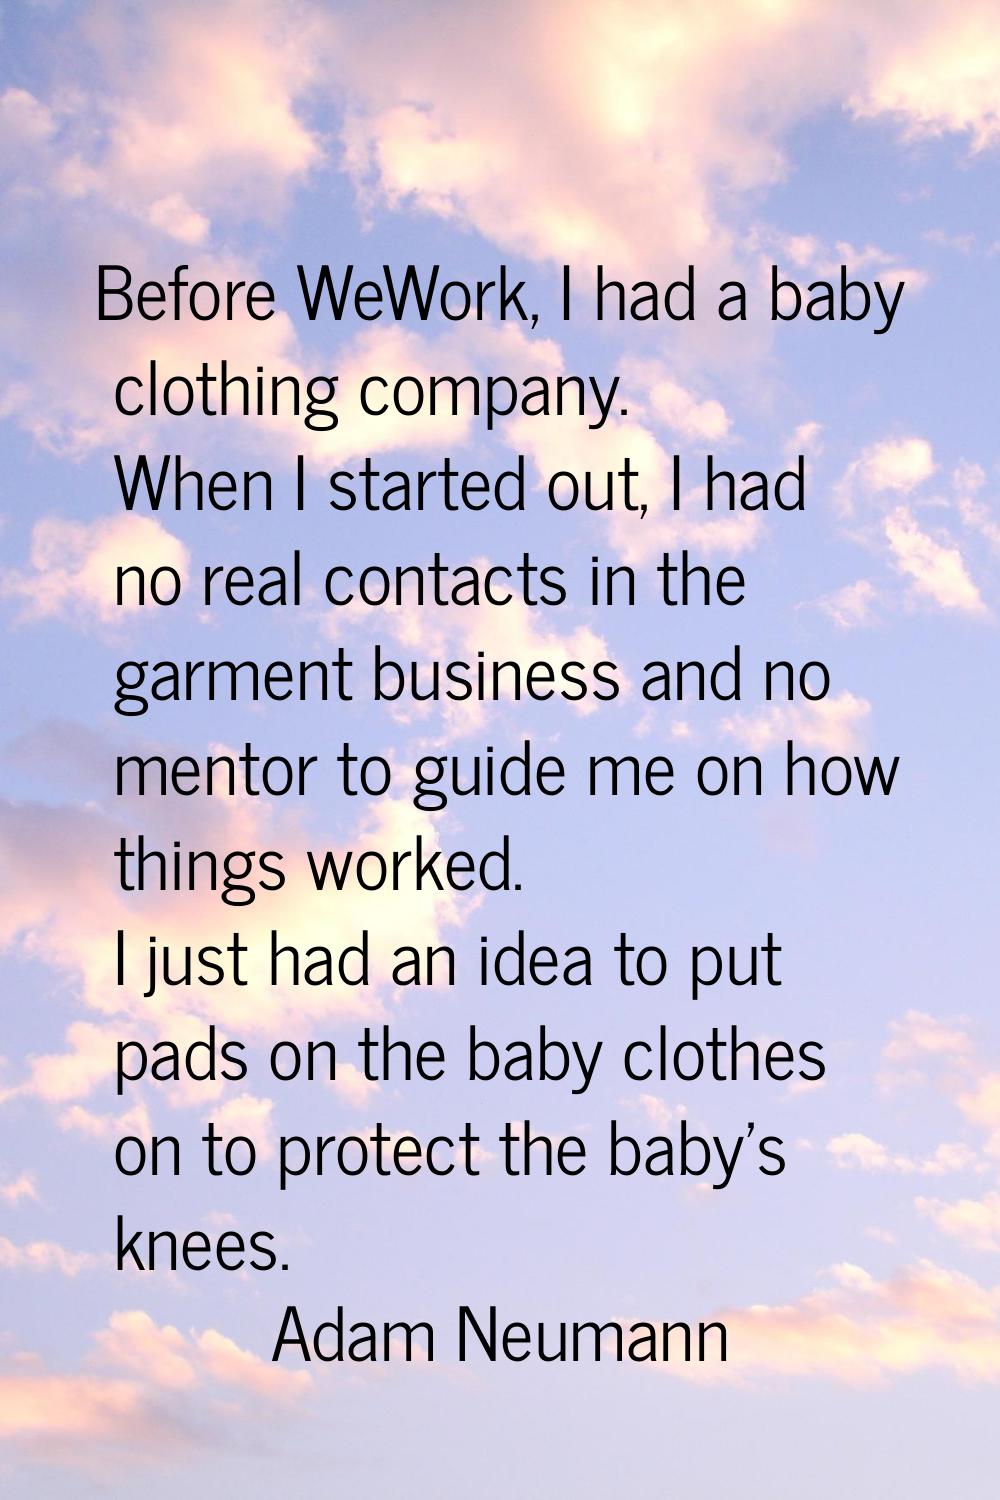 Before WeWork, I had a baby clothing company. When I started out, I had no real contacts in the gar